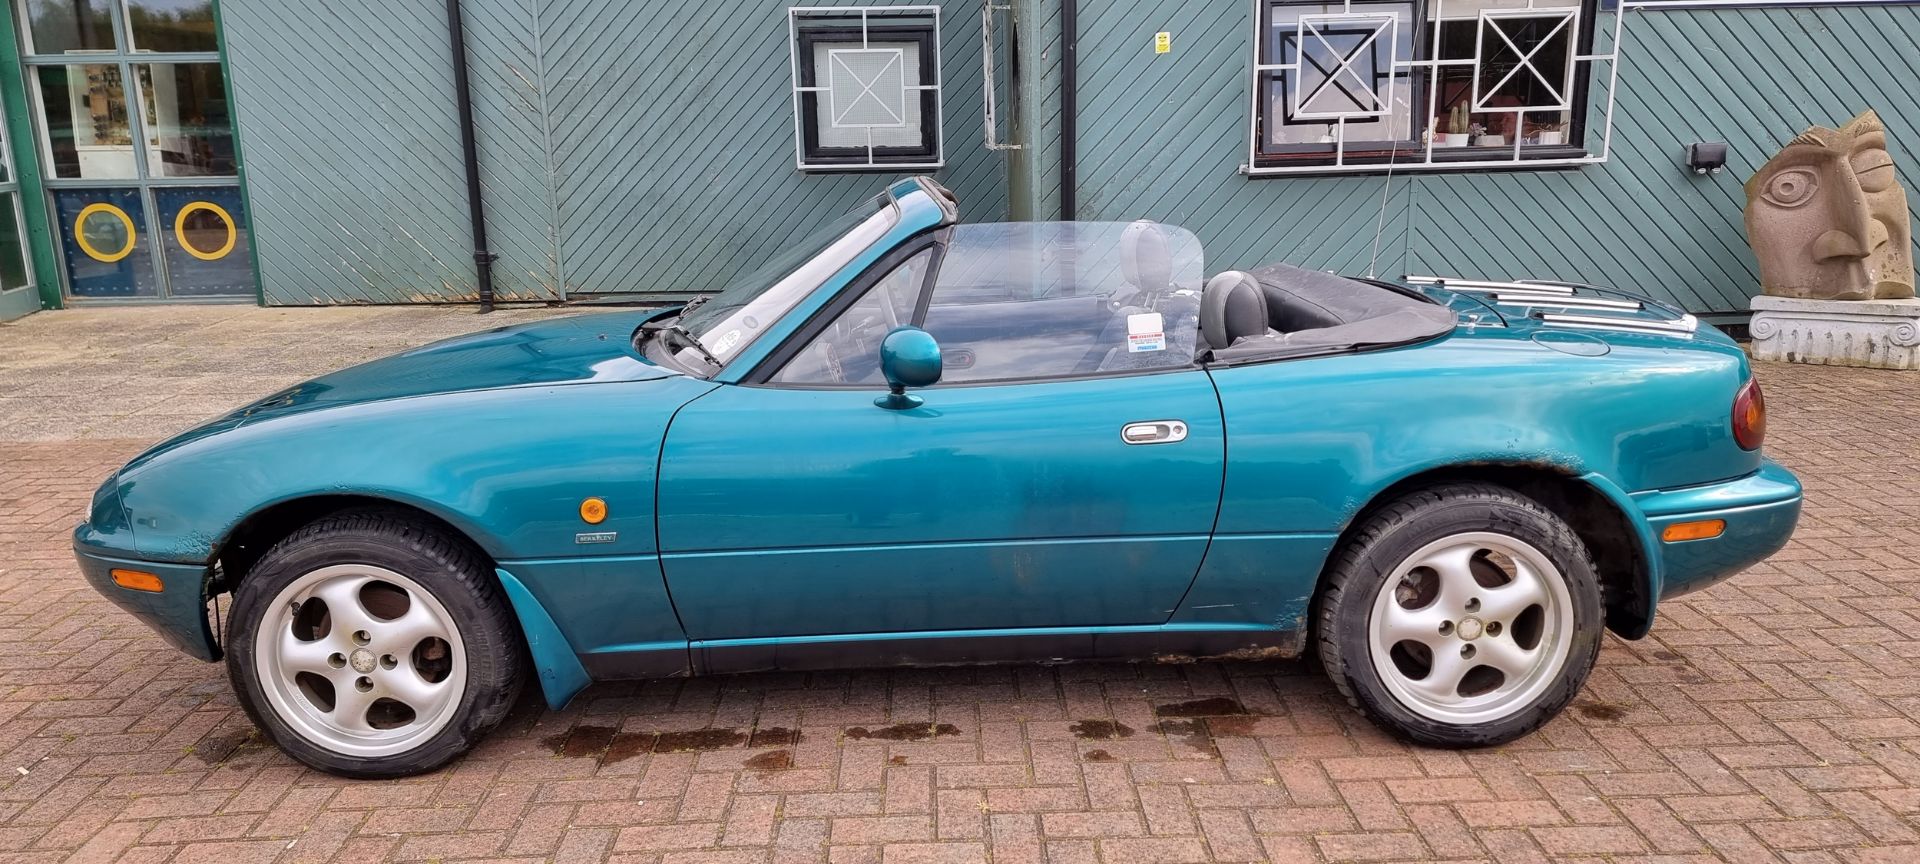 1998 Mazda MX5 Berkeley Limited Edition, 1840cc, project. Registration number R650 EOU. VIN number - Image 3 of 17